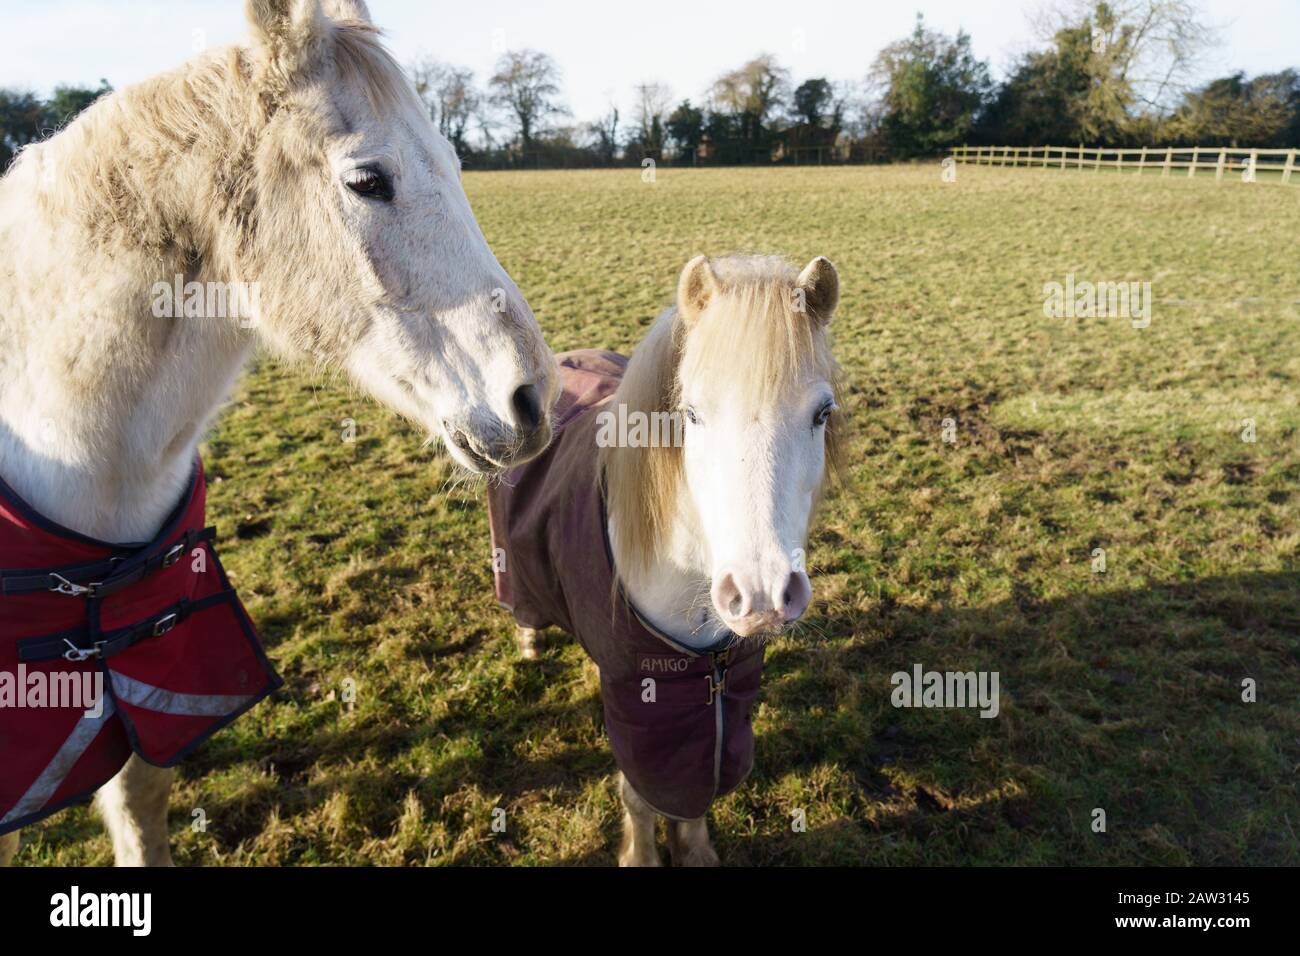 A pair of white horses wearing winter blankets standing at the edge of a farm field, Staveley, North Yorkshire, England, UK. Stock Photo